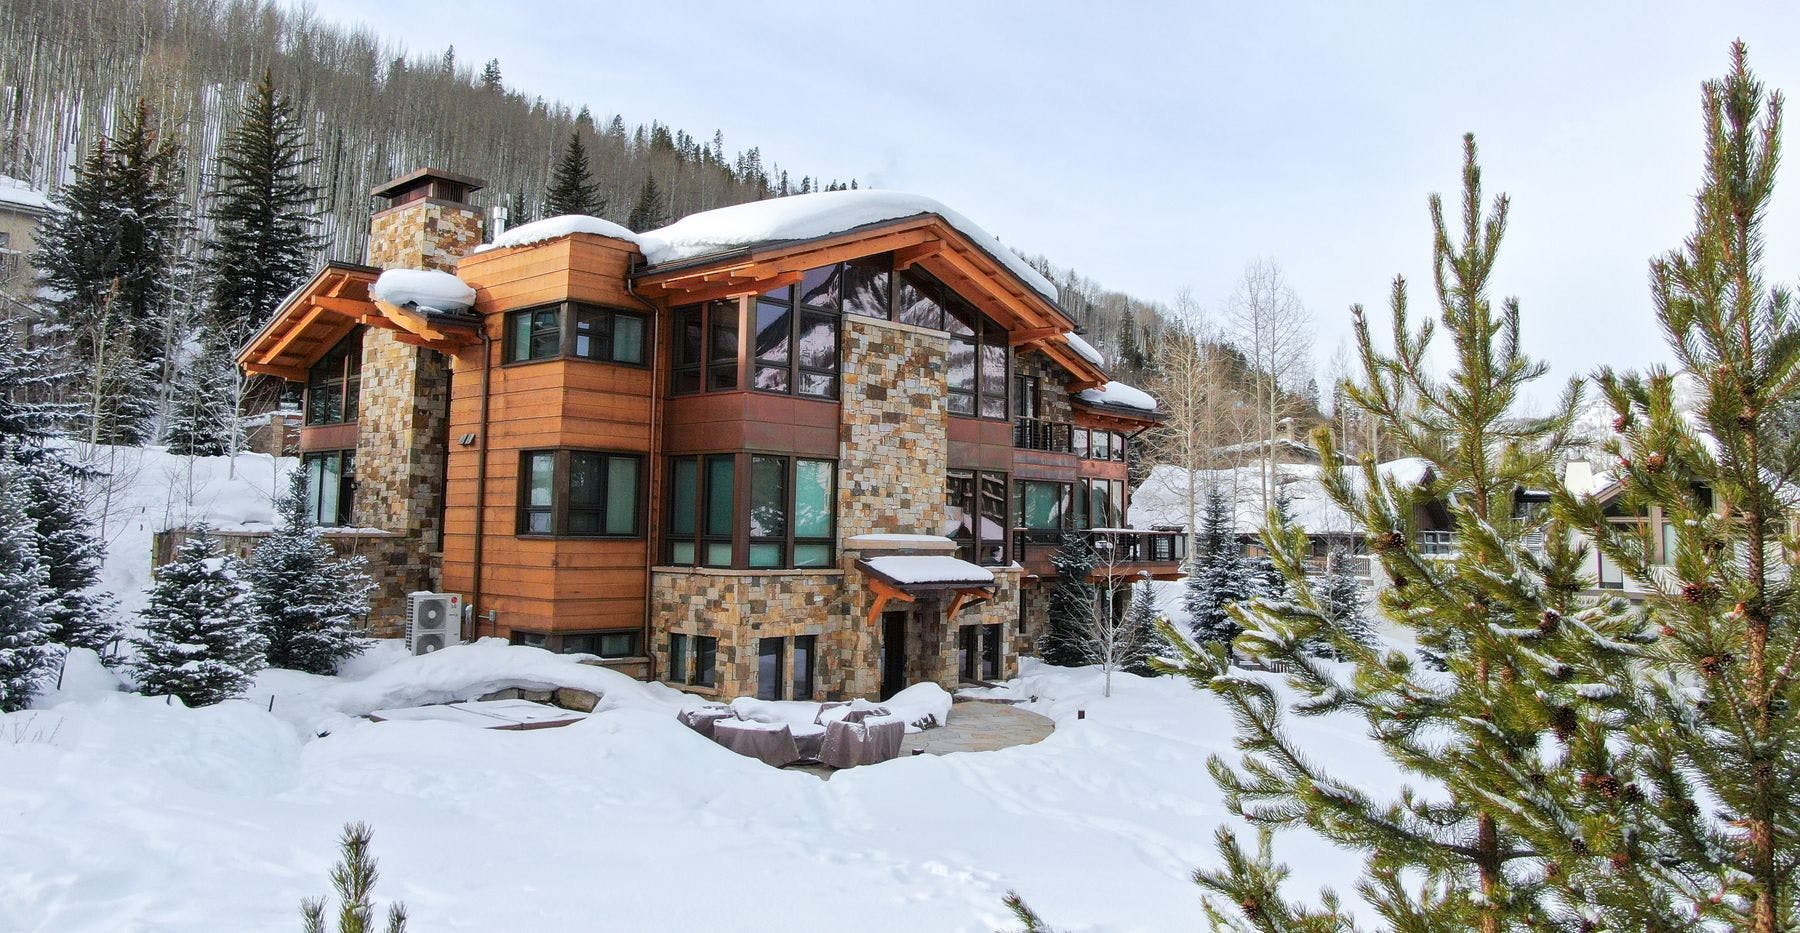 Vacation rental home nestled in the mountains of Vail Valley